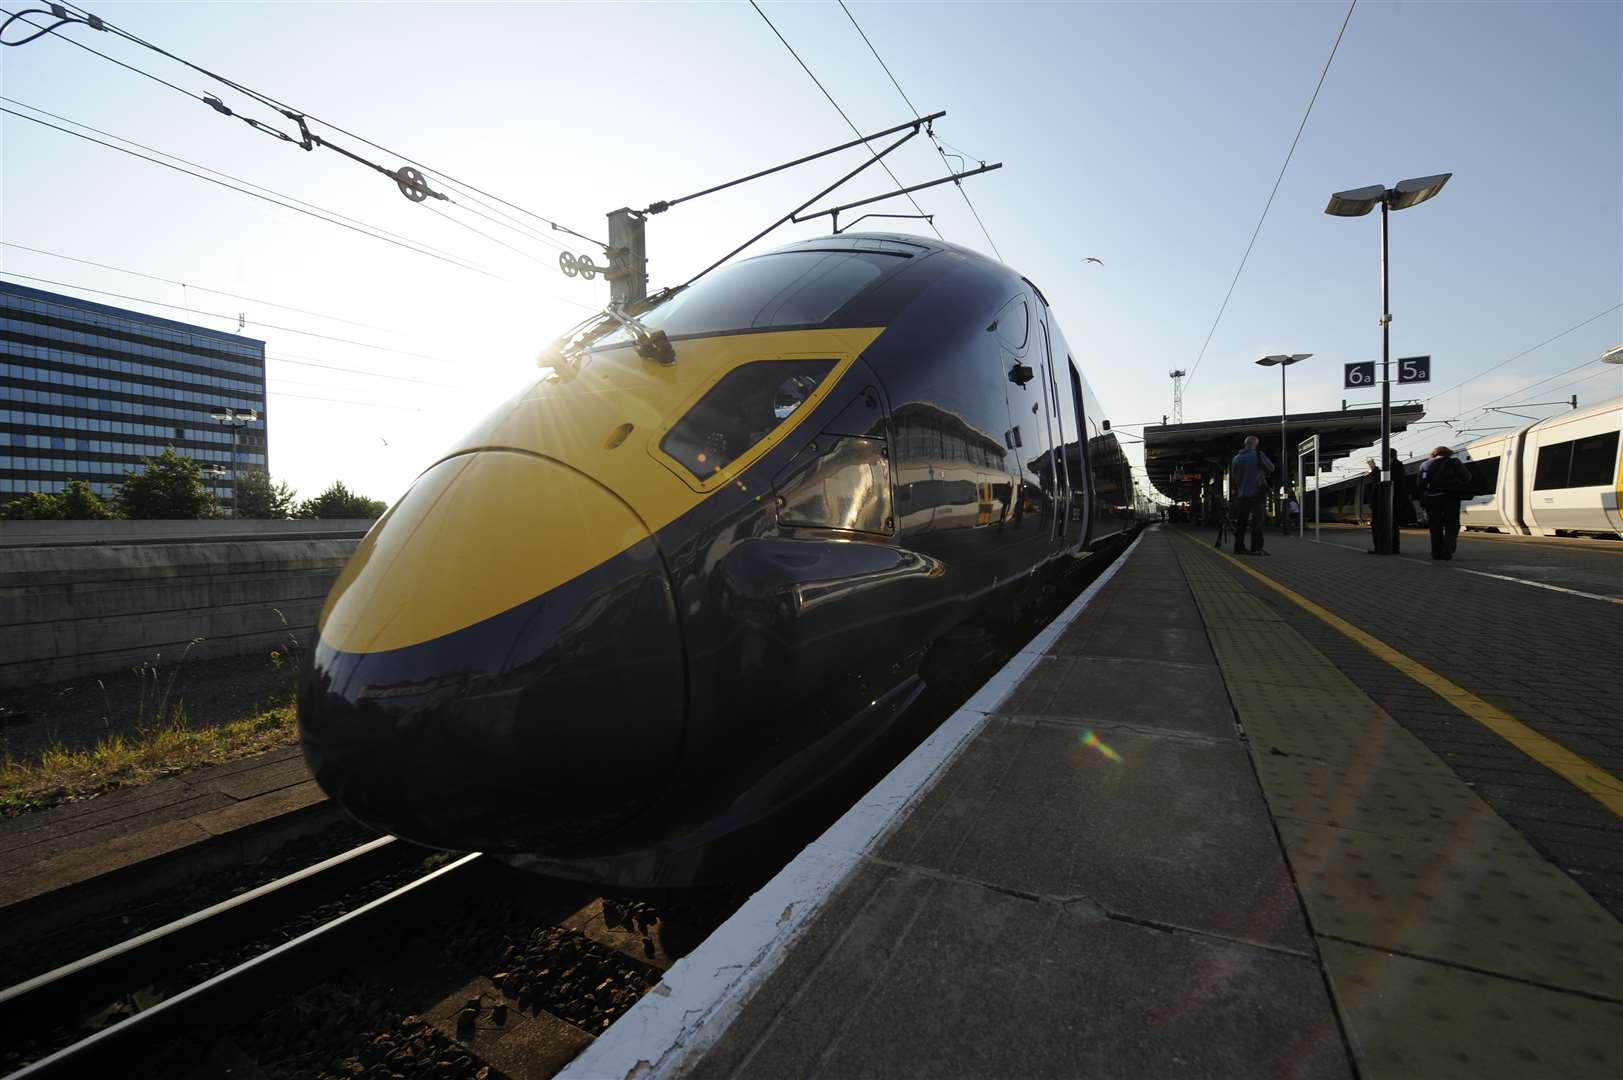 New international trains will pull into Ashford after funding for a signal upgrade was approved